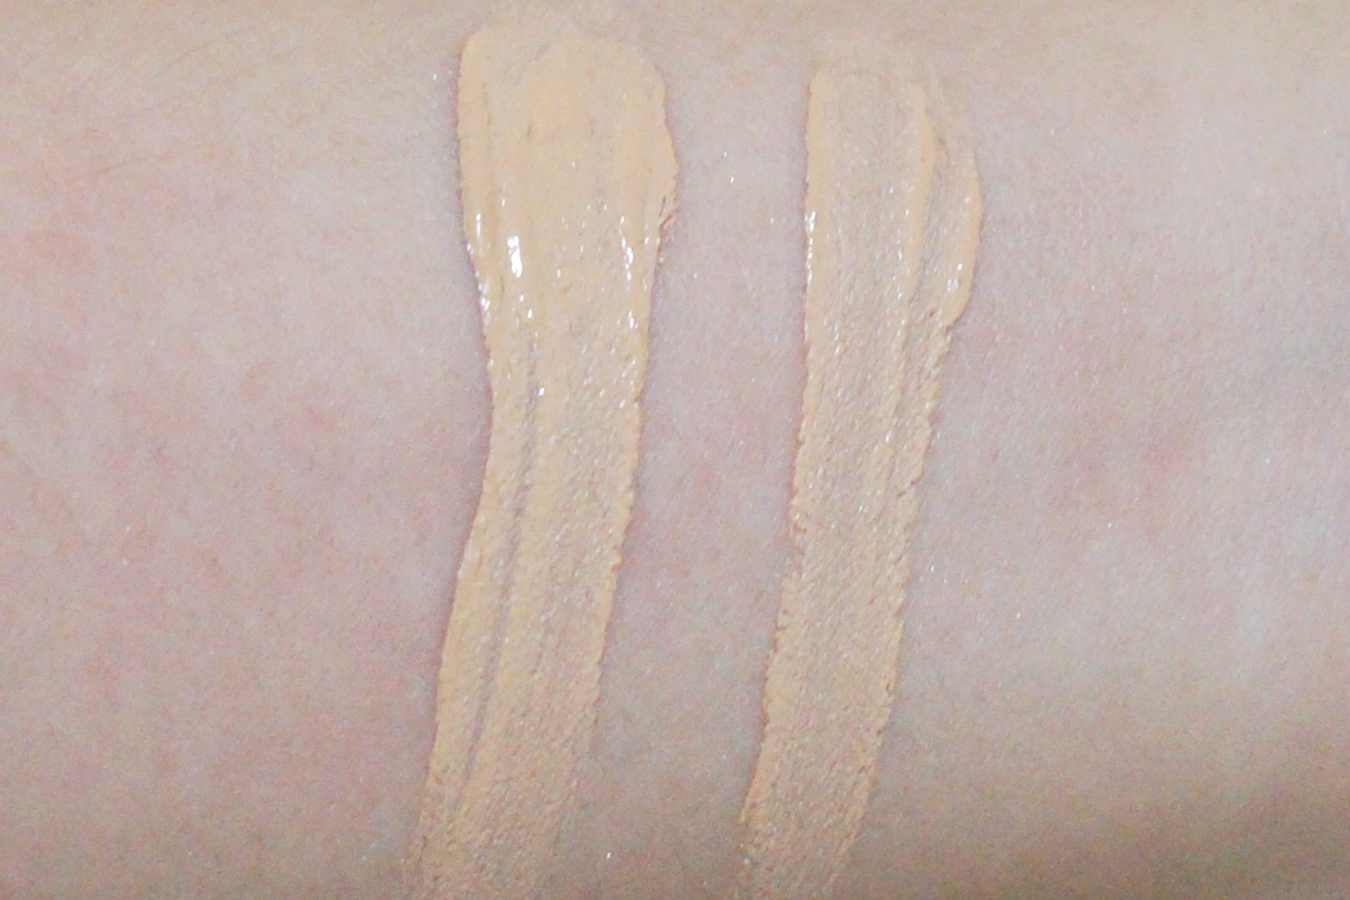 Jello Beans: Fit Me Concealer in 20 Sand Sable | Review, Photos, Swatches